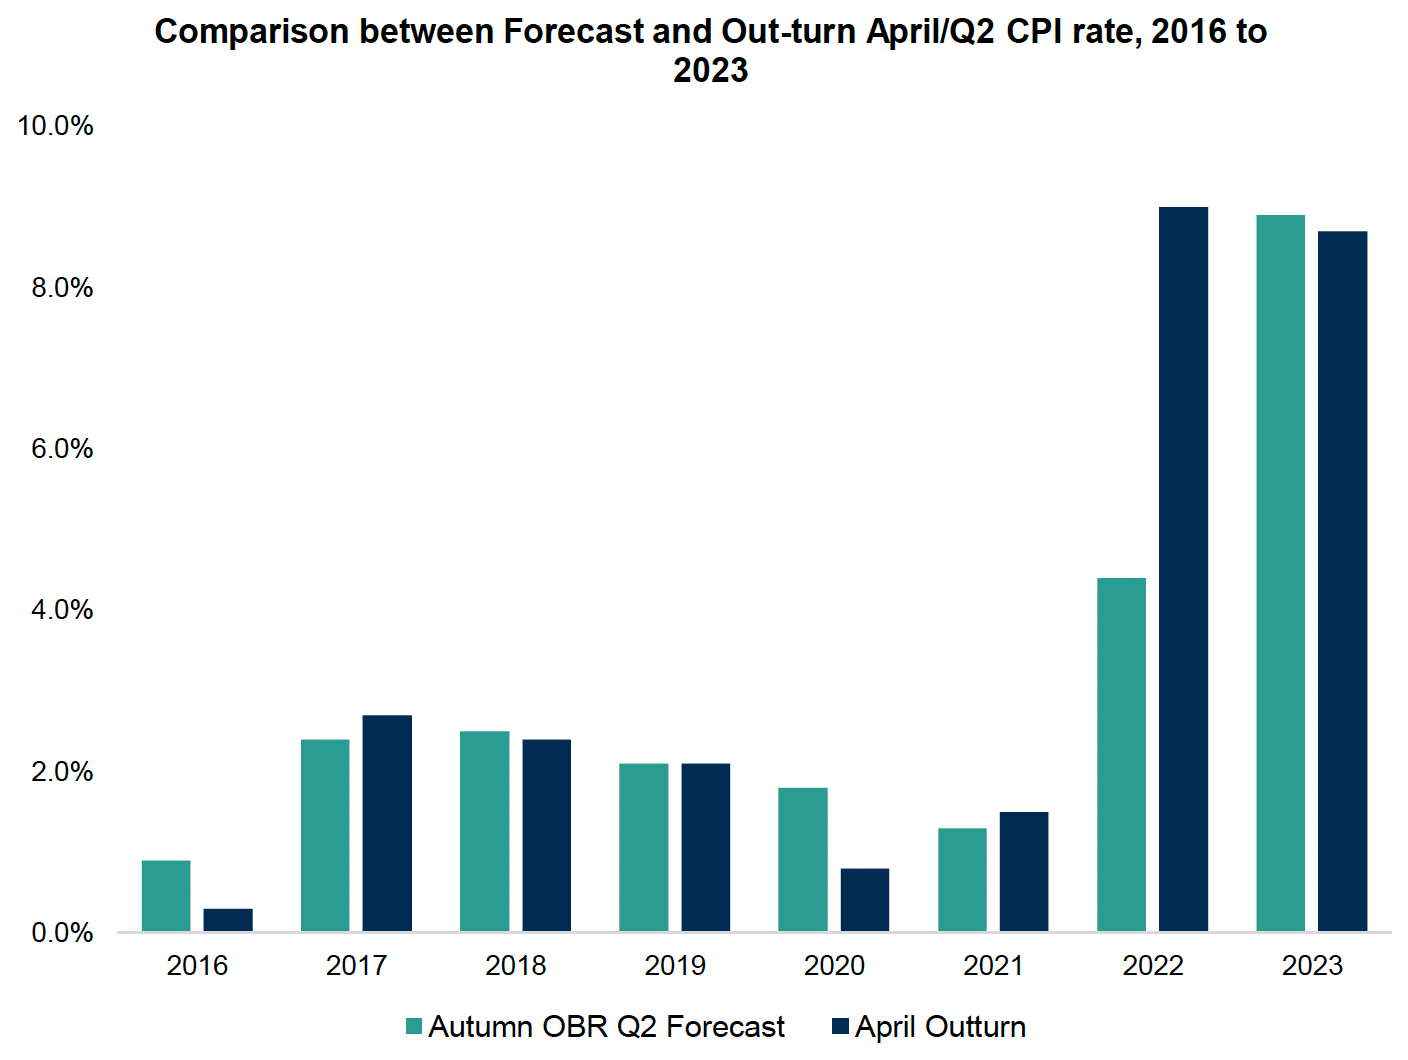 Clustered bar chart showing forecasted Q2 inflation alongside April outturn inflation from 2016 to 2023.